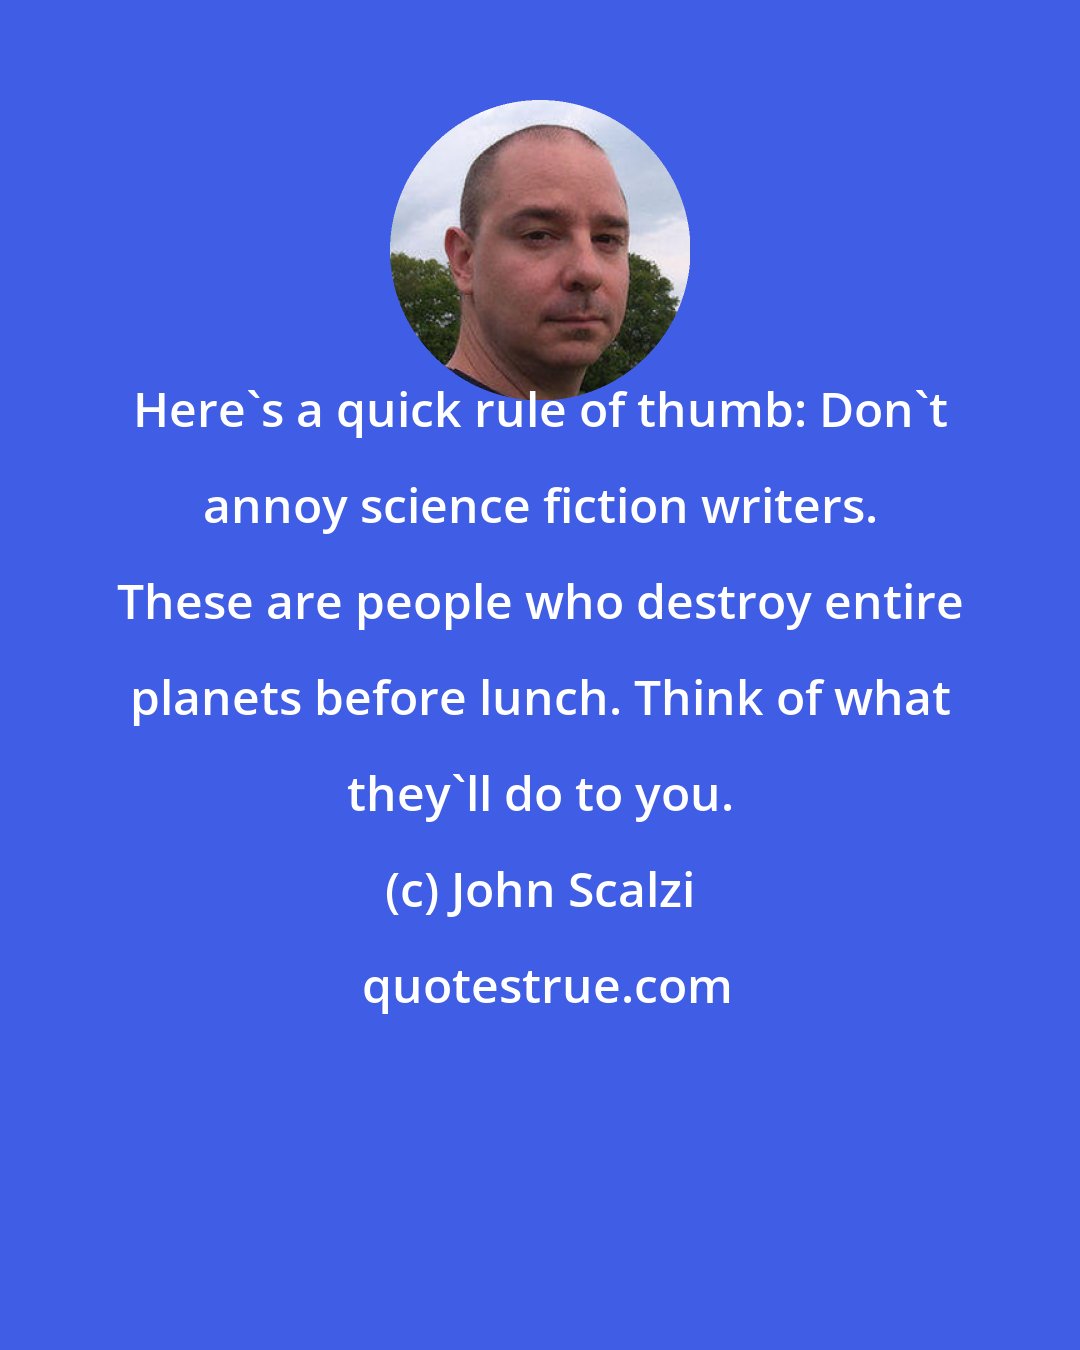 John Scalzi: Here's a quick rule of thumb: Don't annoy science fiction writers. These are people who destroy entire planets before lunch. Think of what they'll do to you.